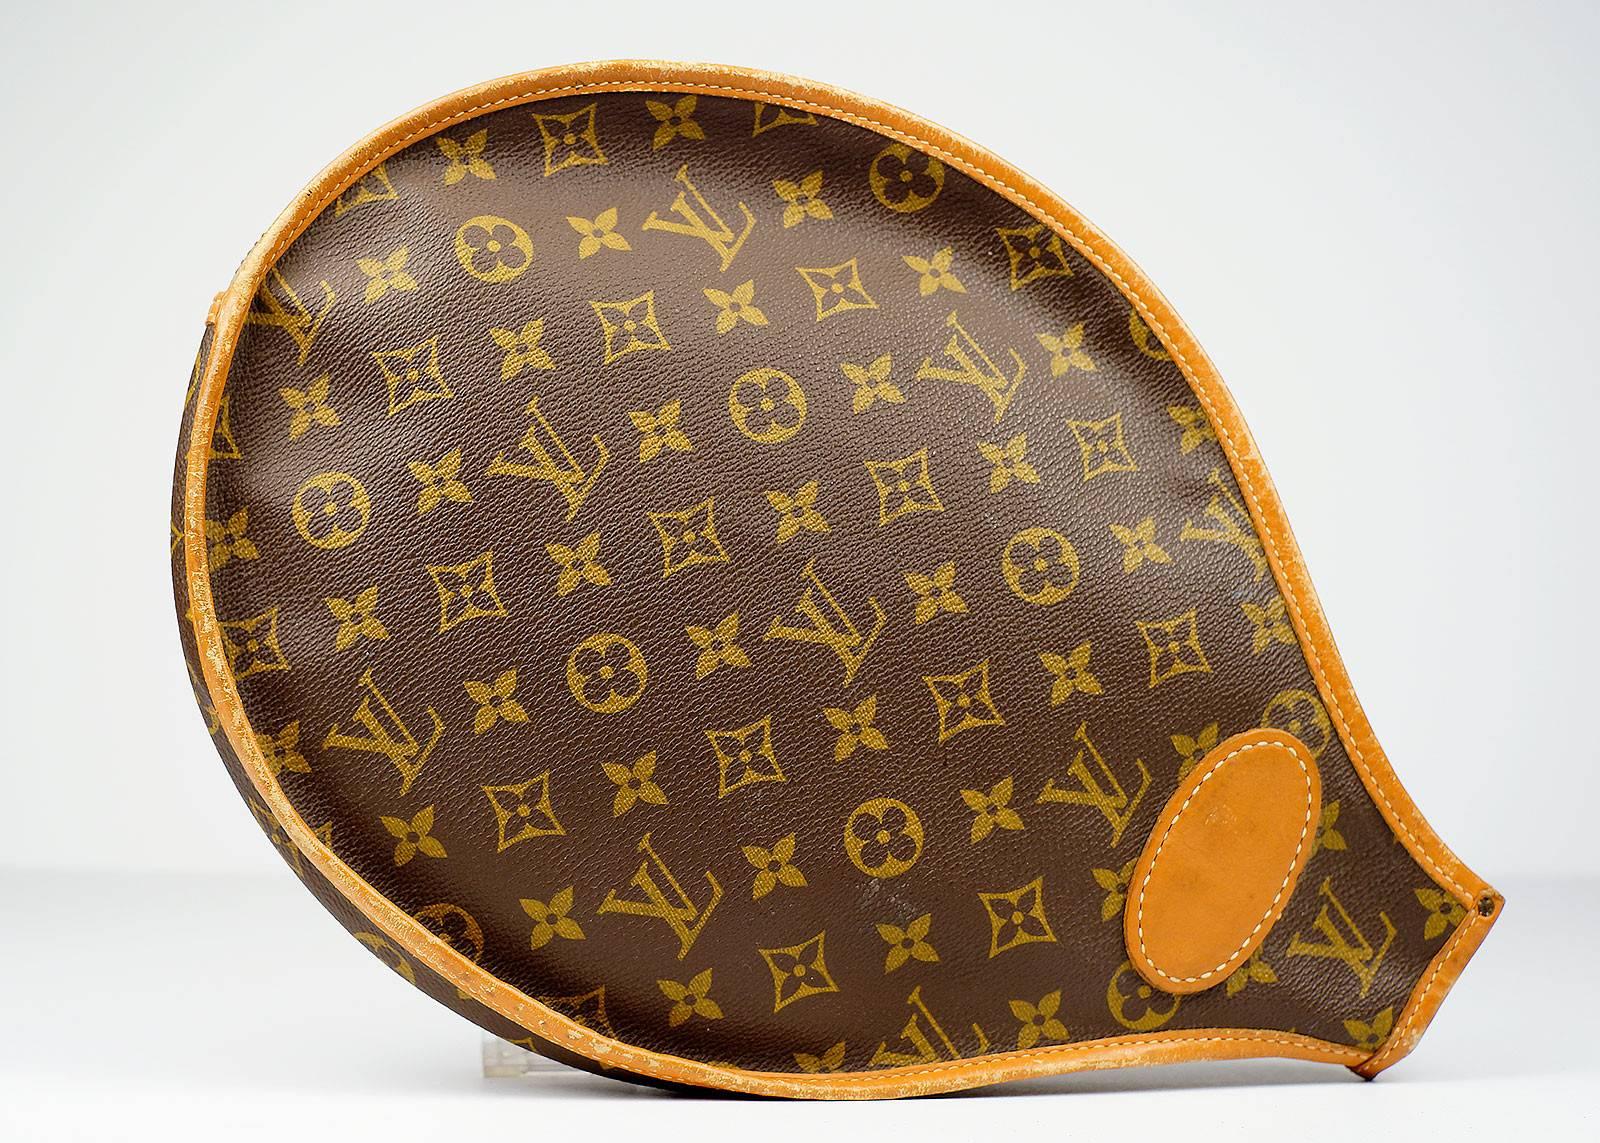 Louis Vuitton tennis racquet cover with side zipper.

-Measurements-
length:13"
height: 9.5"

Good Vintage Condition:Please remember all clothes are previously owned and gently worn unless otherwise noted.